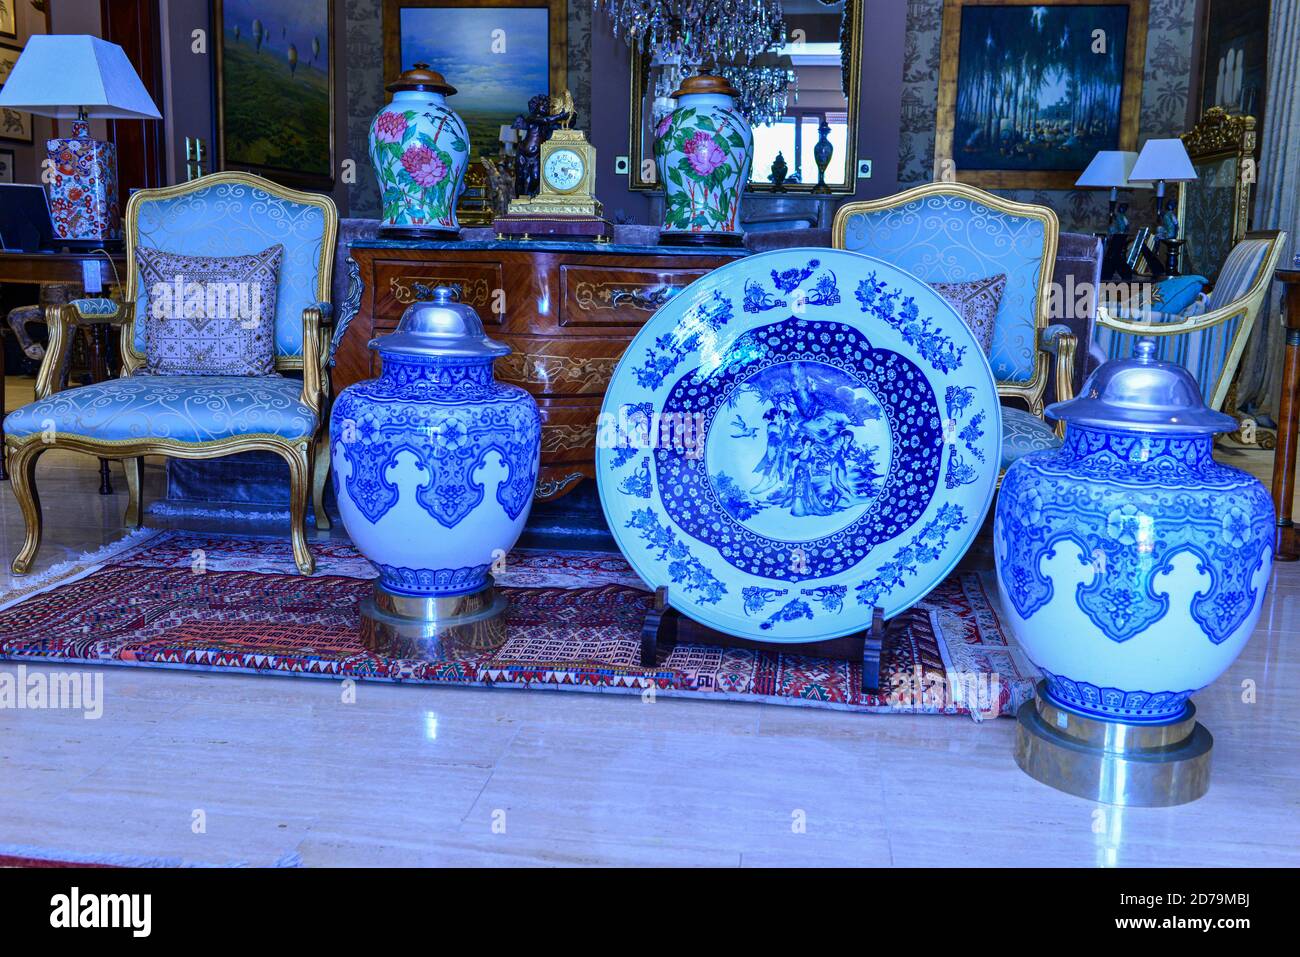 Various antique clocks vases and candlesticks on display. Stock Photo